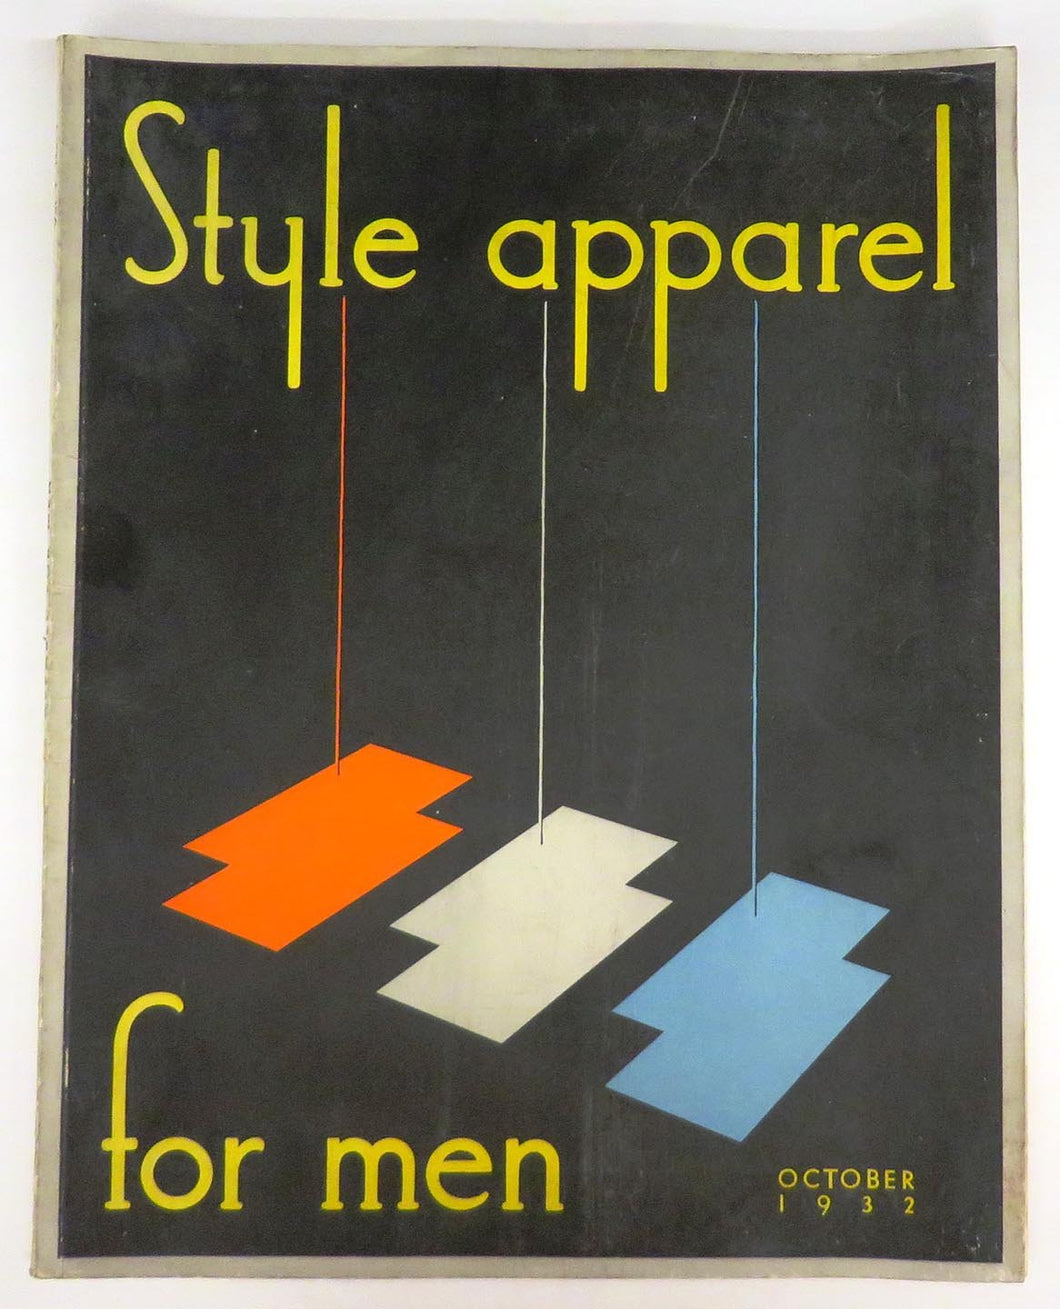 Style apparel for men, October 1932